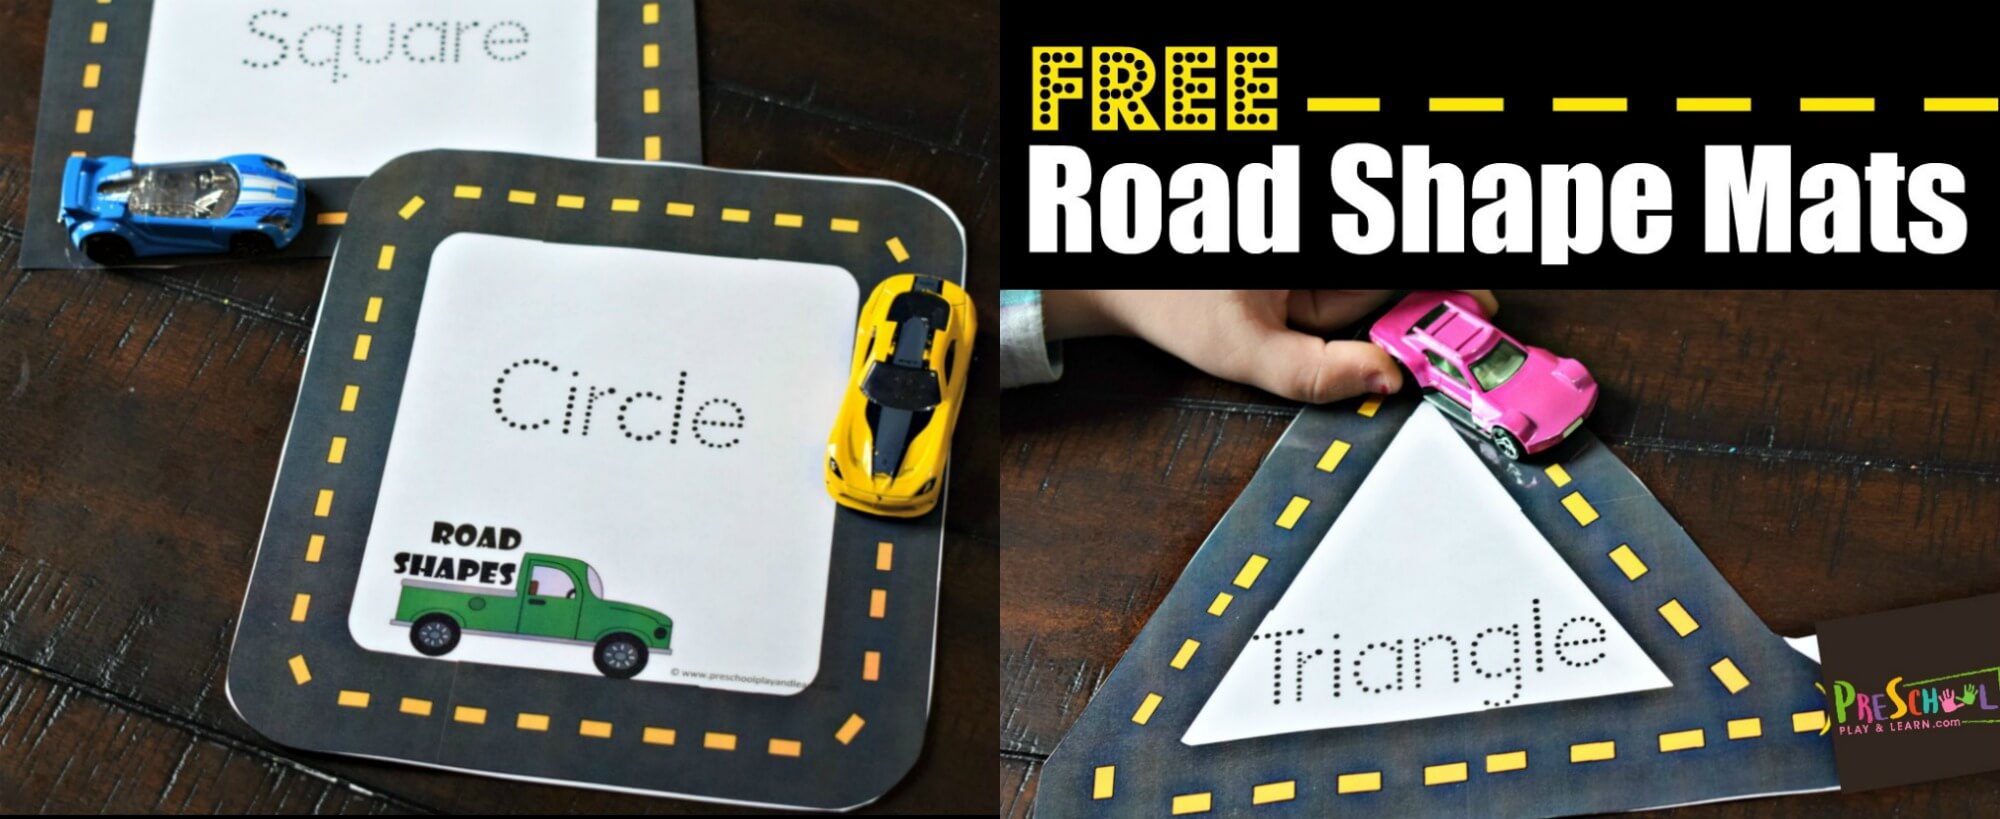 Free Road Shape Mats for Alphabet Road Tracing Book